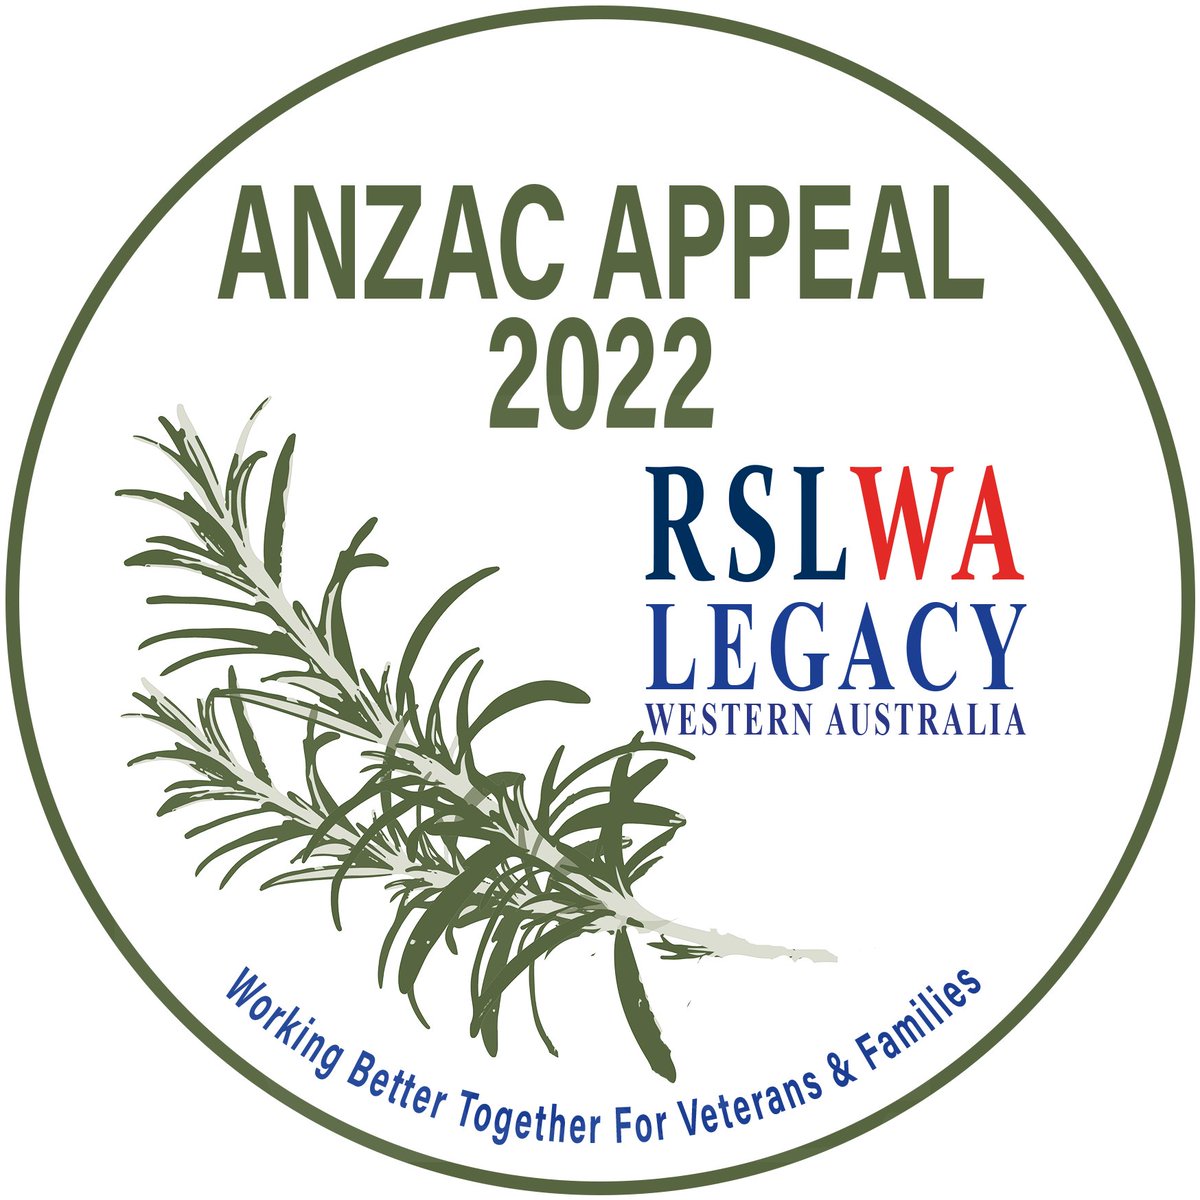 Help raise funds for RSLWA and Legacy WA for our joint ANZAC Day Appeal! Order merchandise at lnkd.in/gWtcfB6G #RSLWA #ANZACAppeal #Fundraise #LegacyWA #Veterans